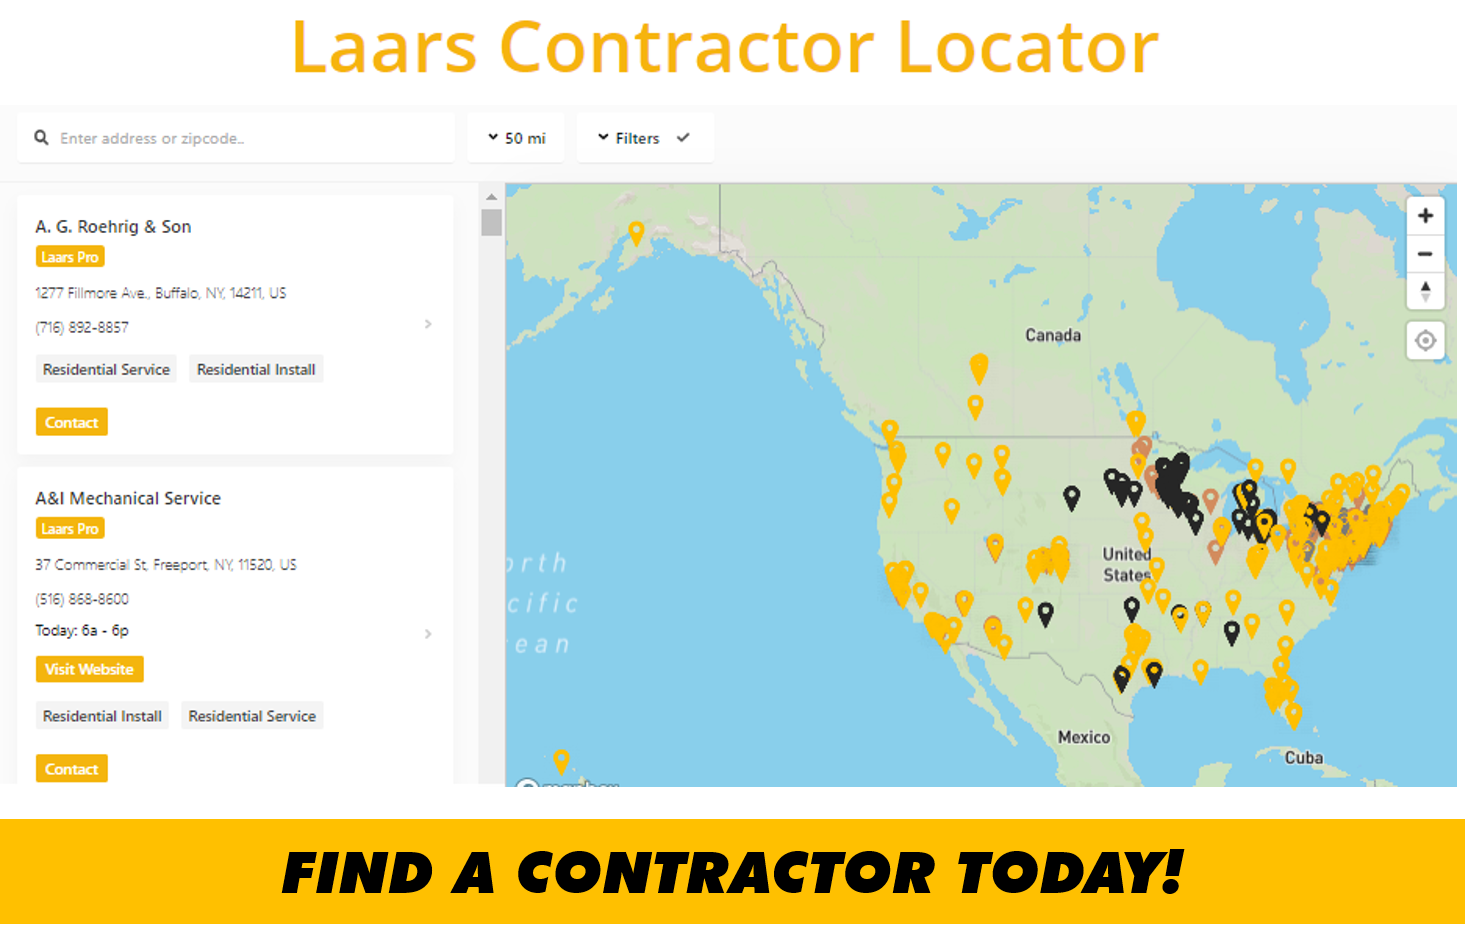 Find a Contractor